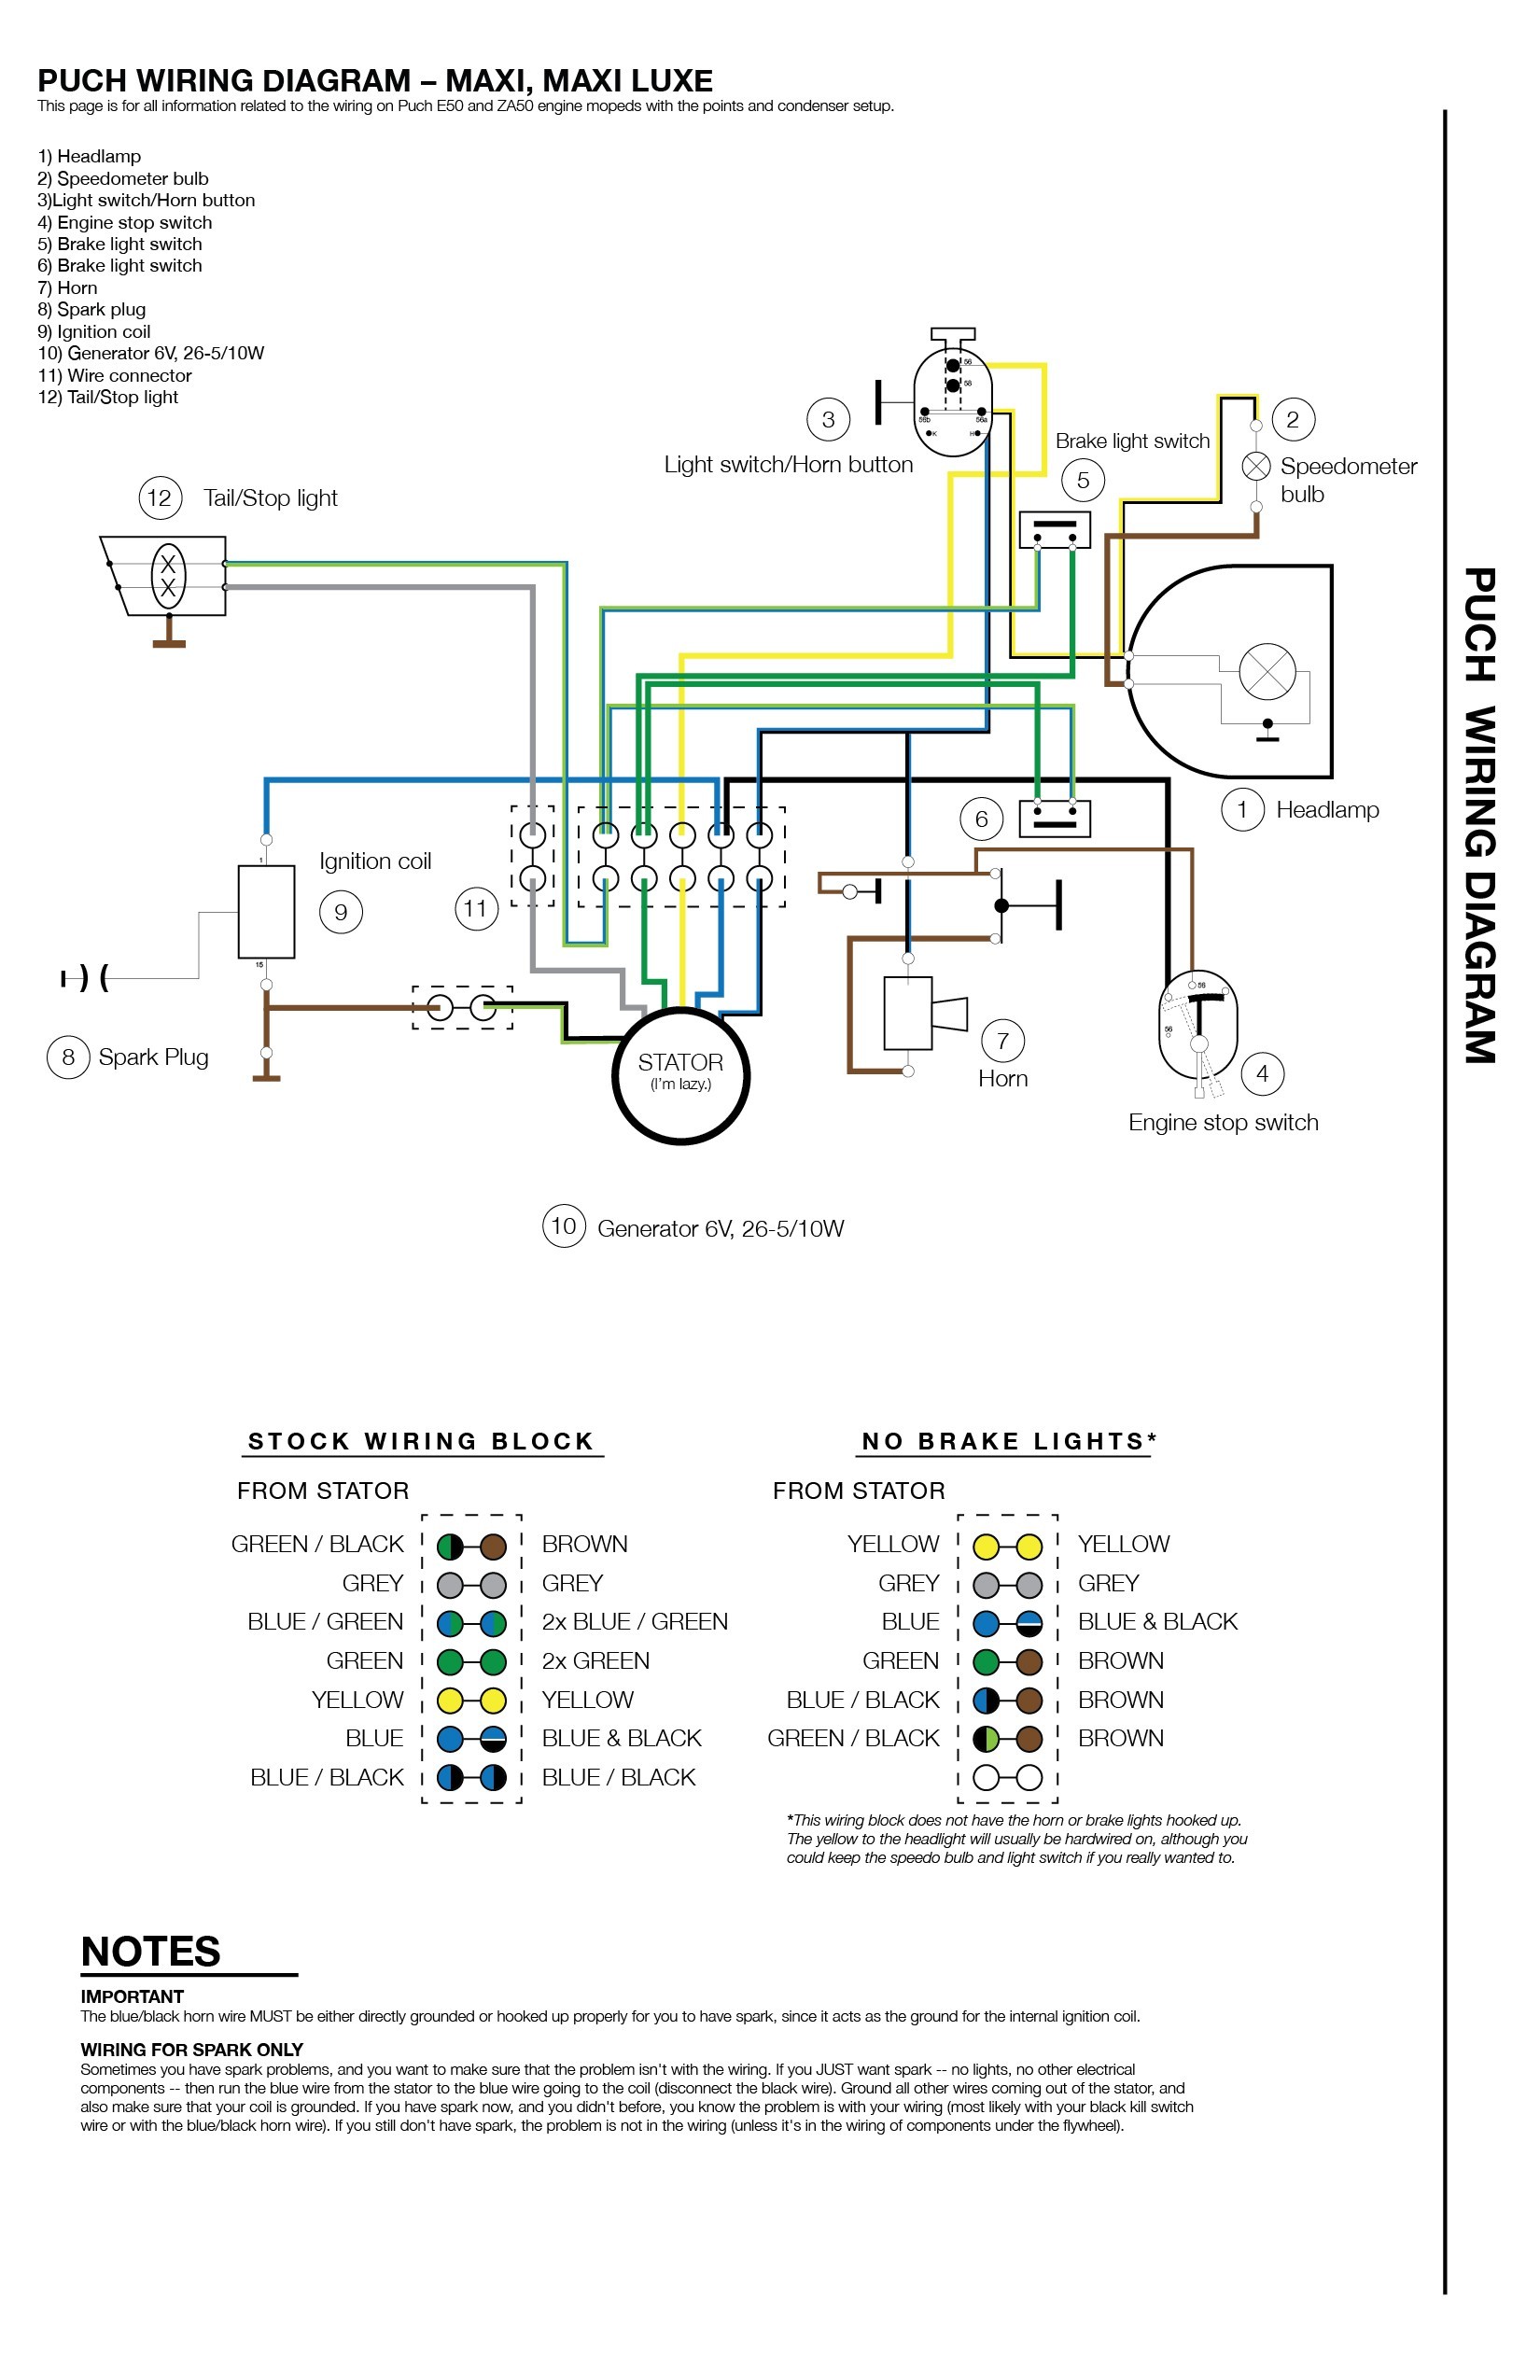 puch moped wiring diagram puch wiring diagram 1978 79 6 wire rh pinterest